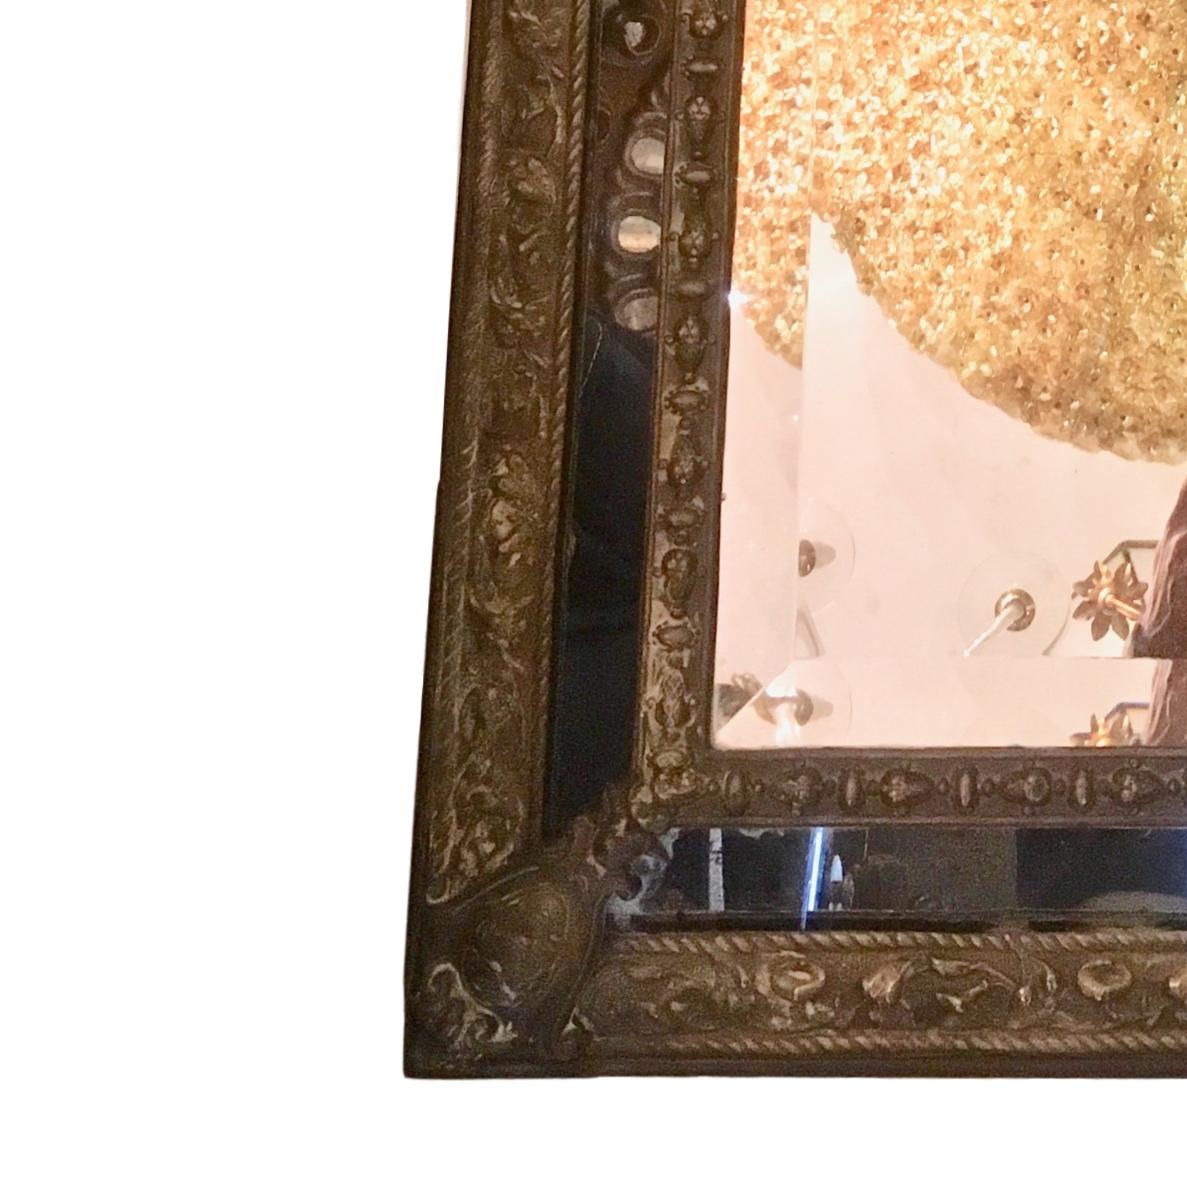 A late 19th century Dutch repousse' mirror with foliage motif and crowned by a lion.

Measurements:
Height: 42